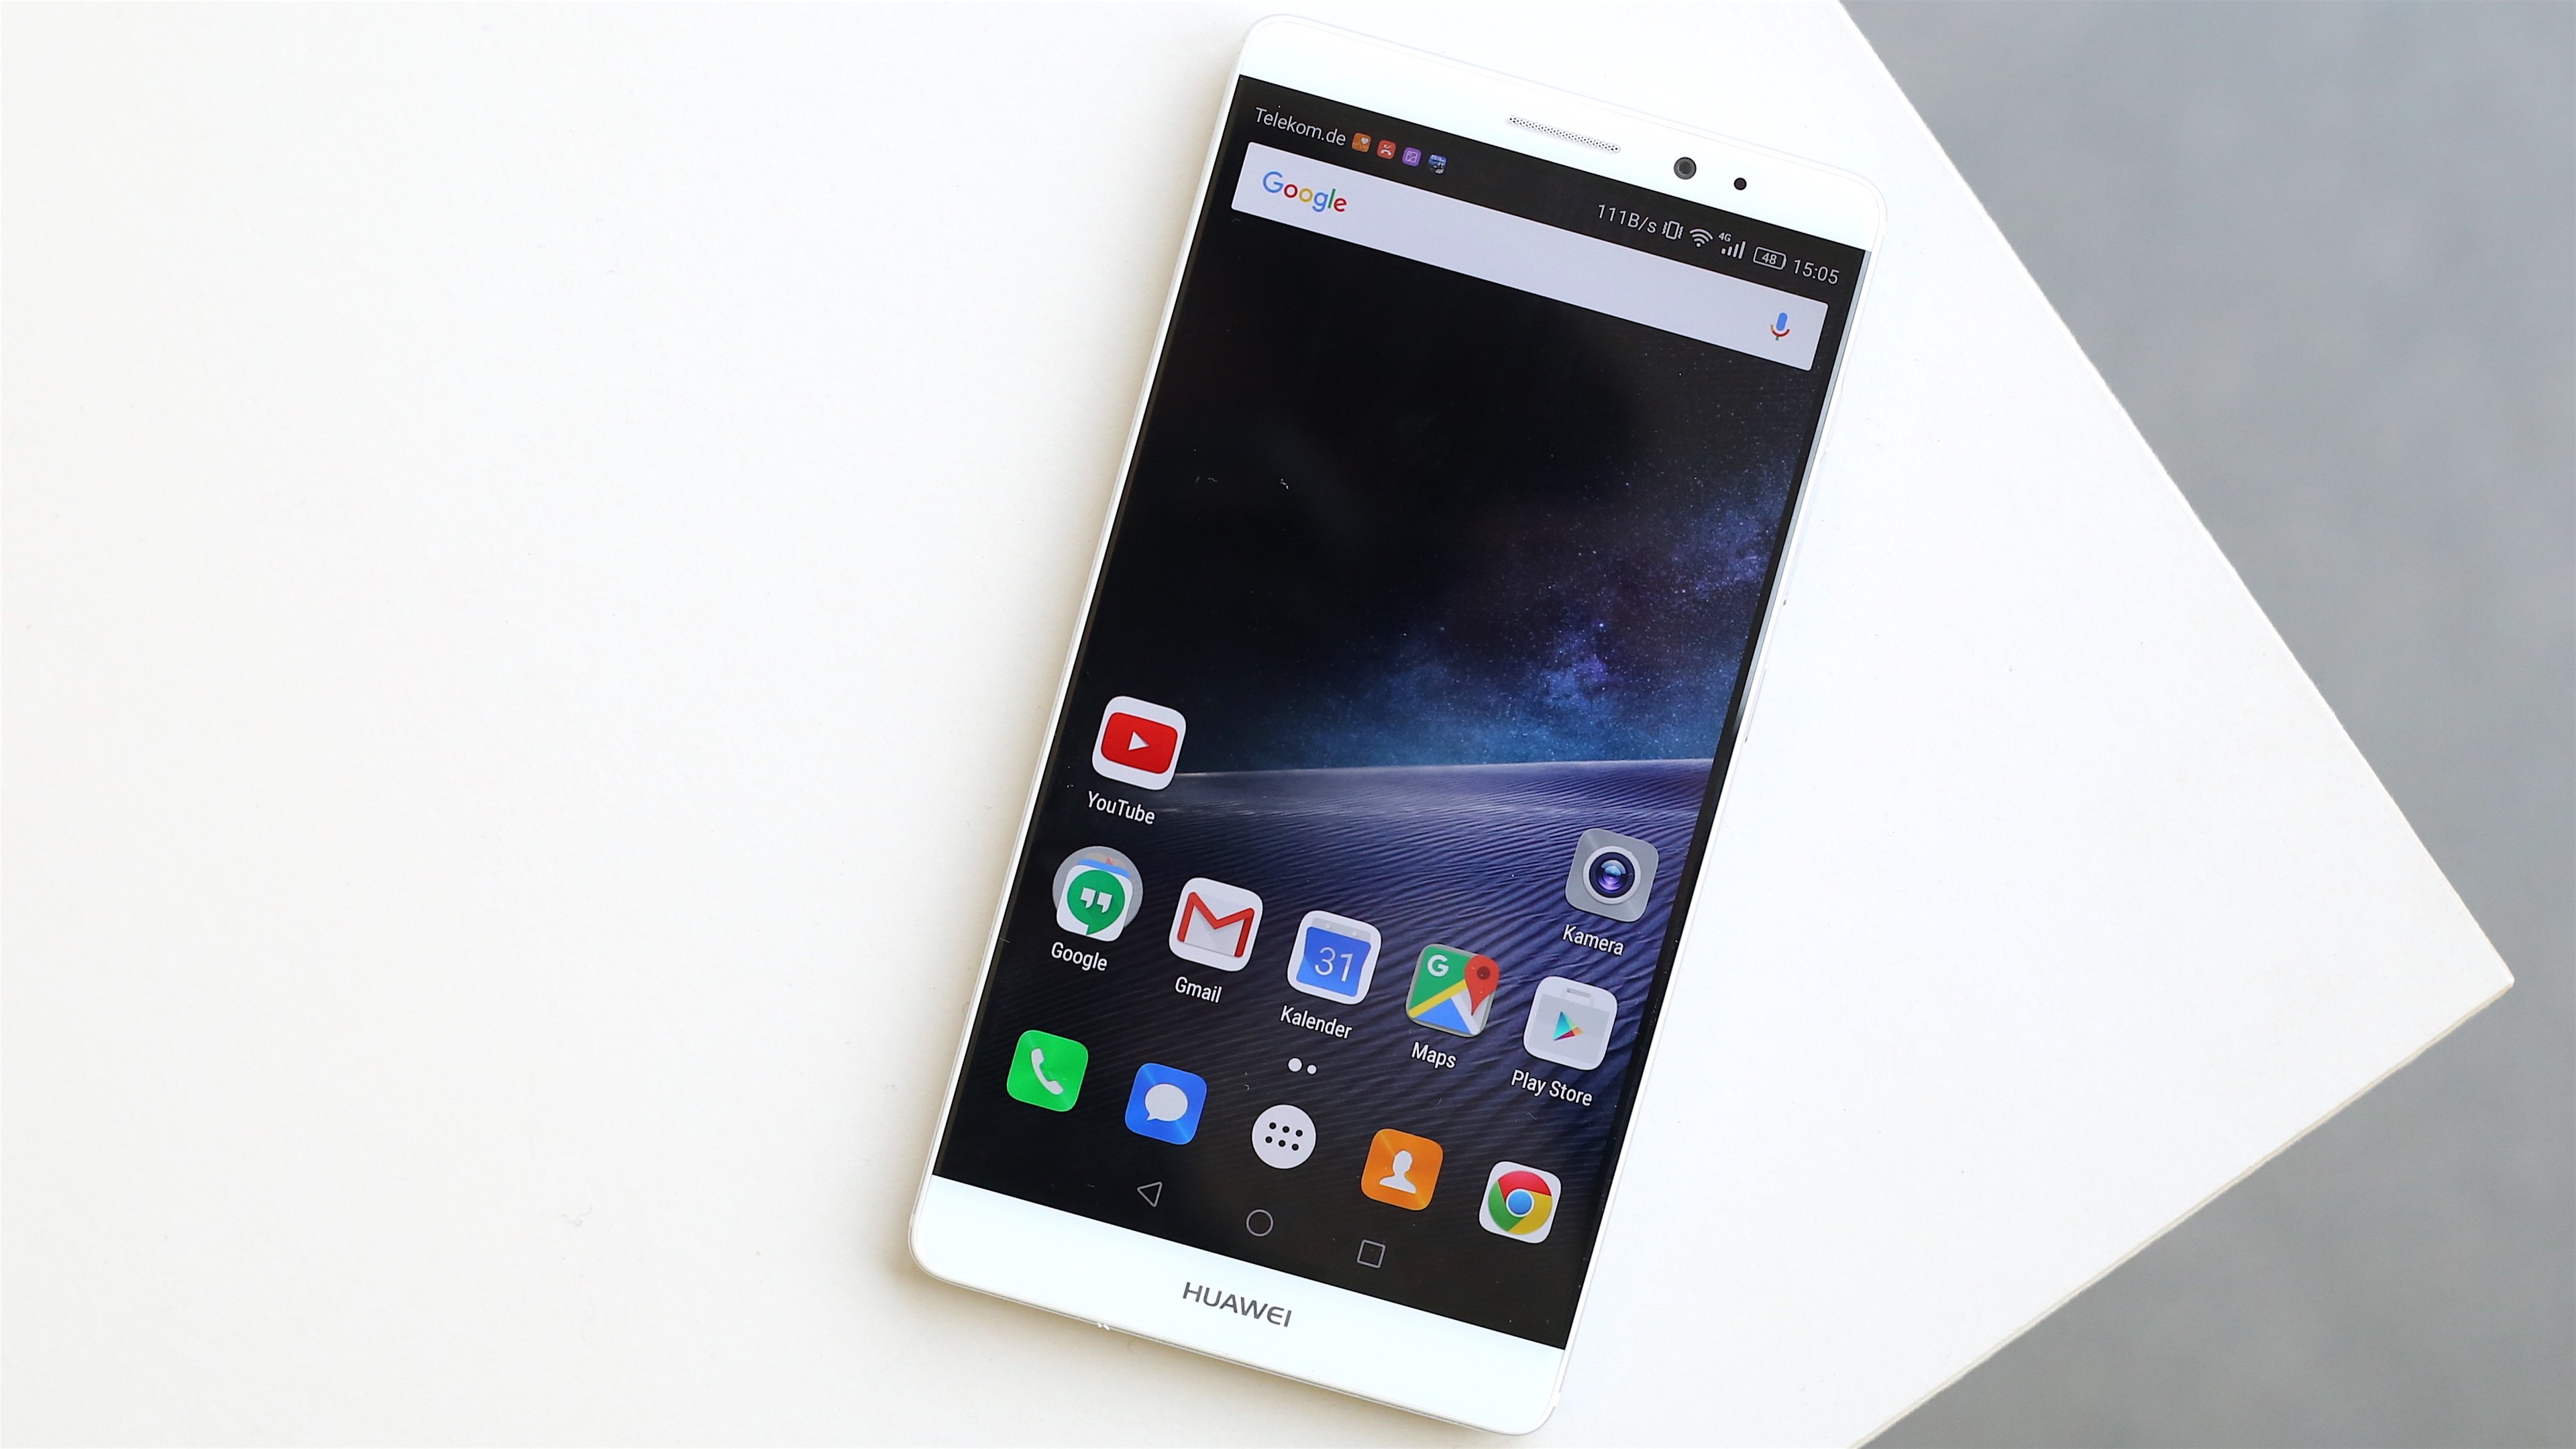 Huawei: Mate 8, Phablet, A high-end Android smartphone produced as a part of the Mate series. 3840x2160 4K Background.